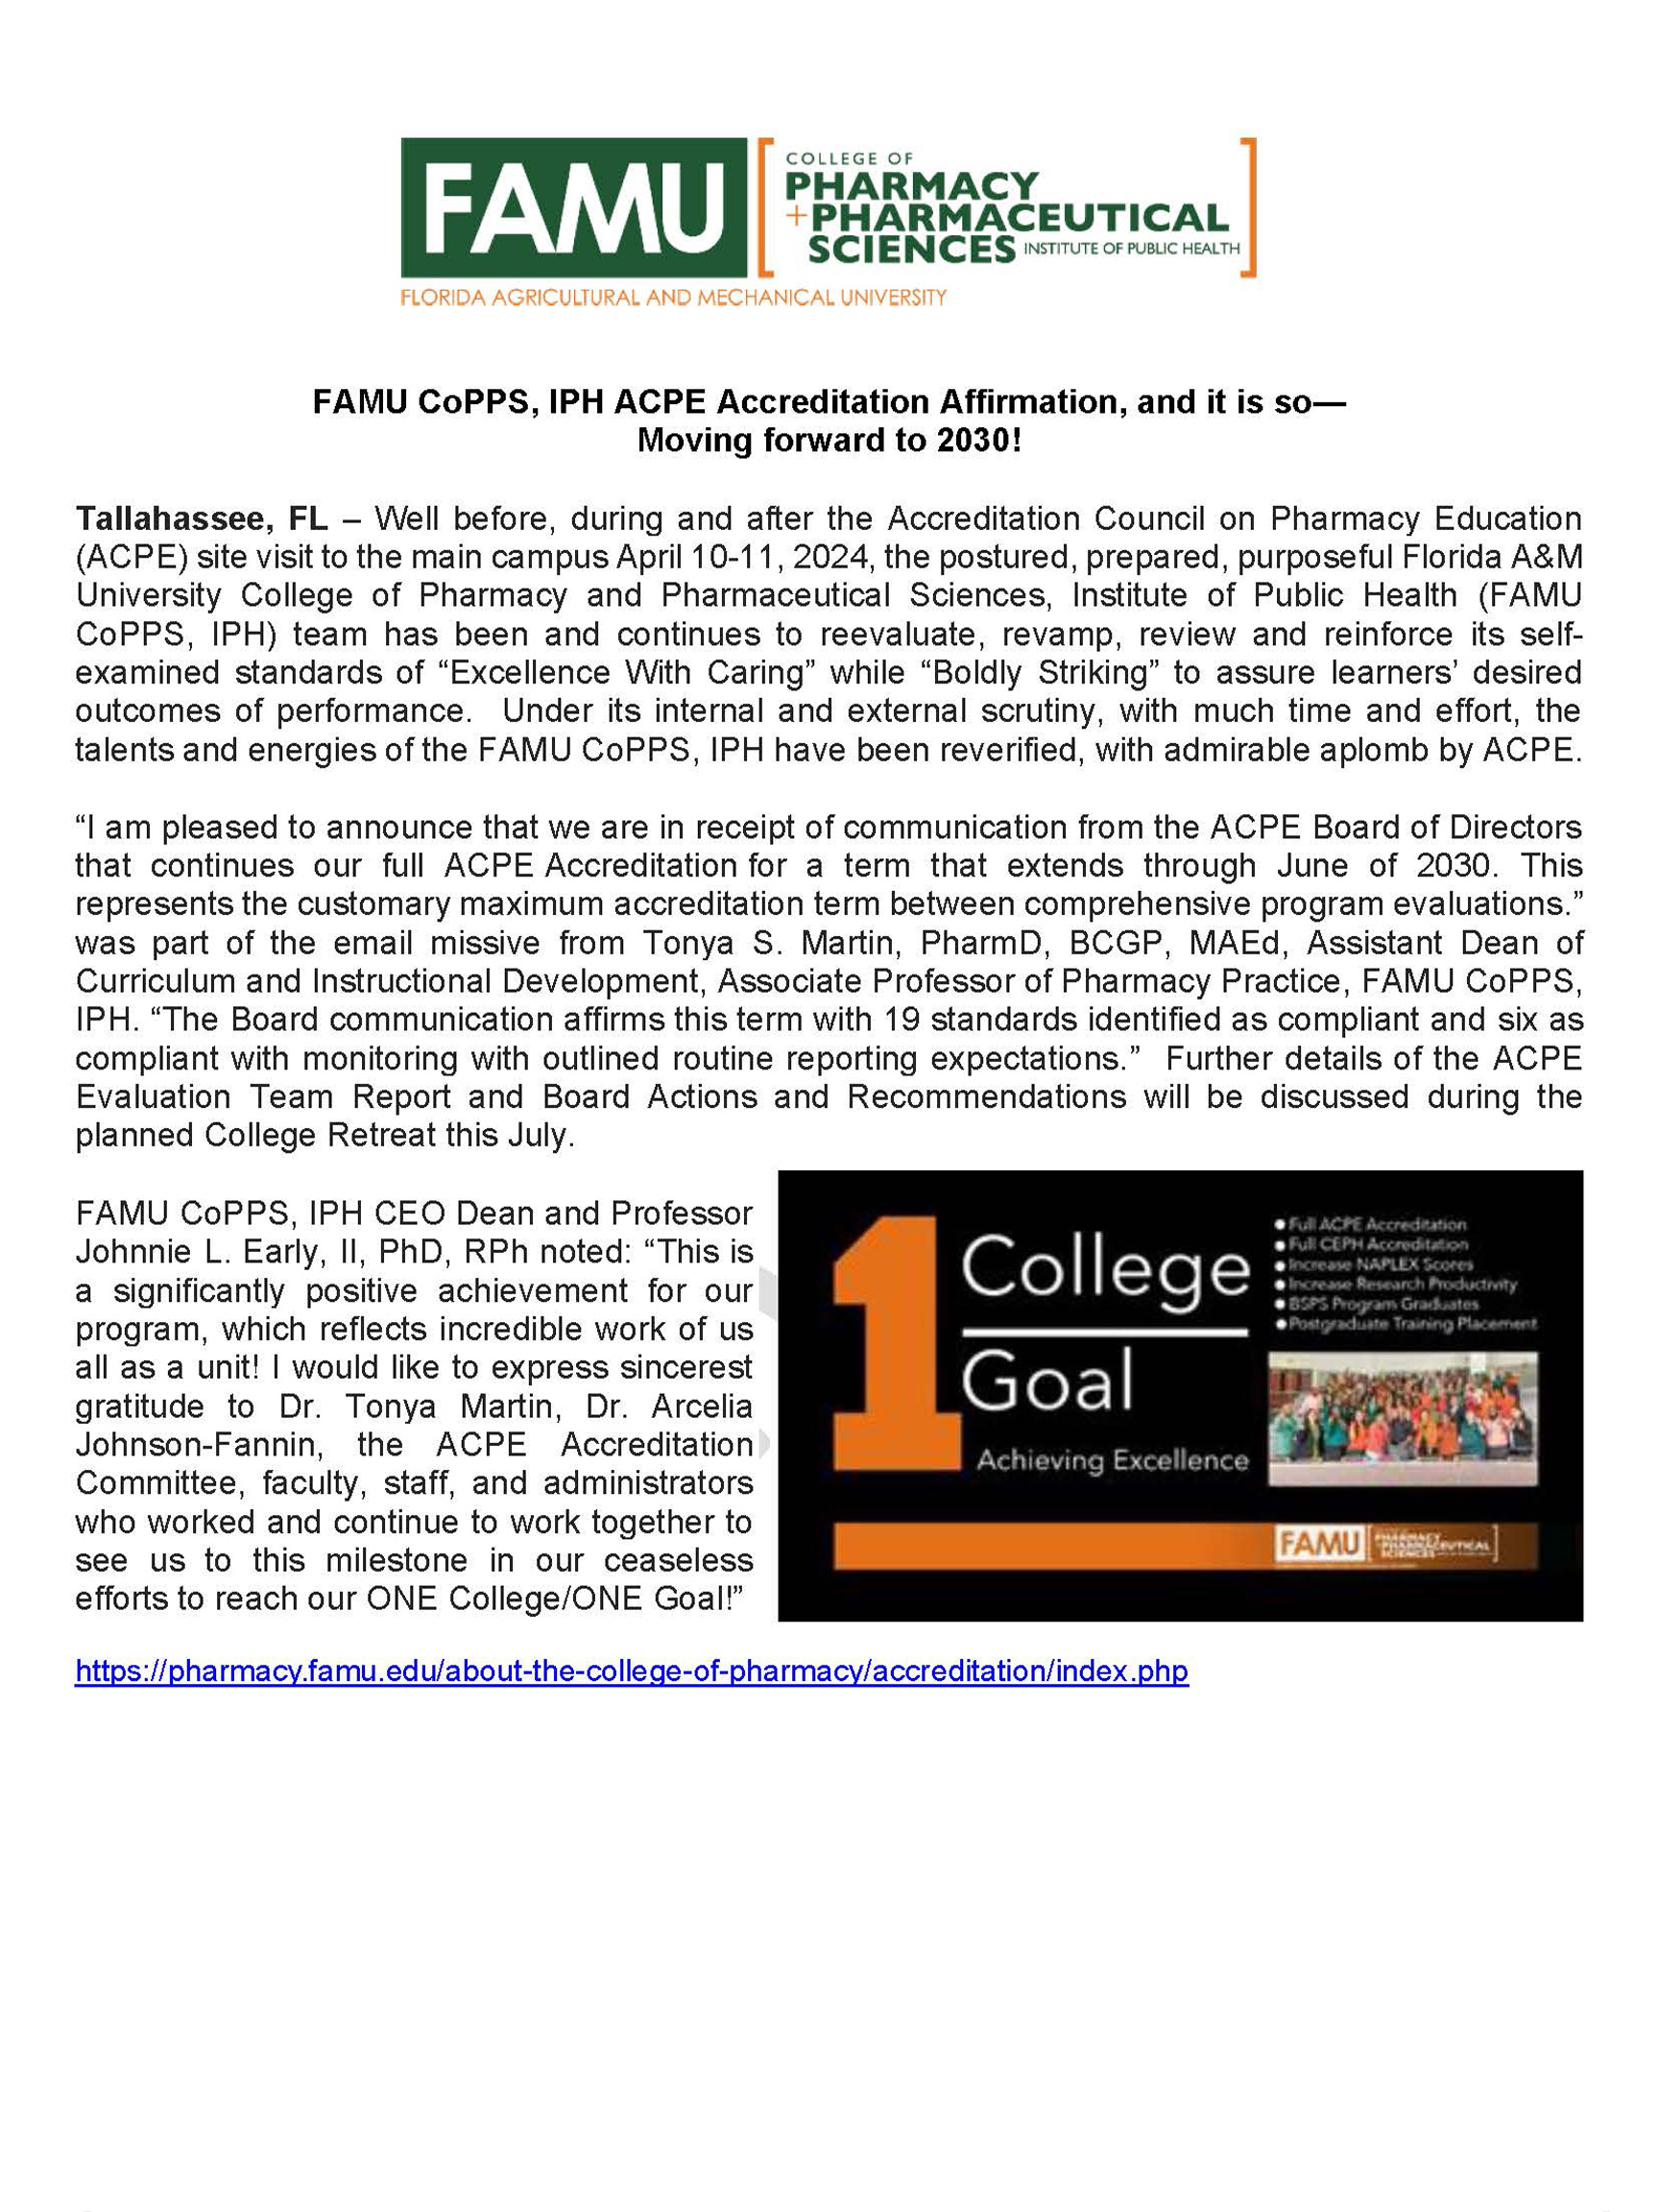 FAMU CoPPS, IPH ACPE Accreditation Affirmation, and it is so- Moving forward to 2030! 